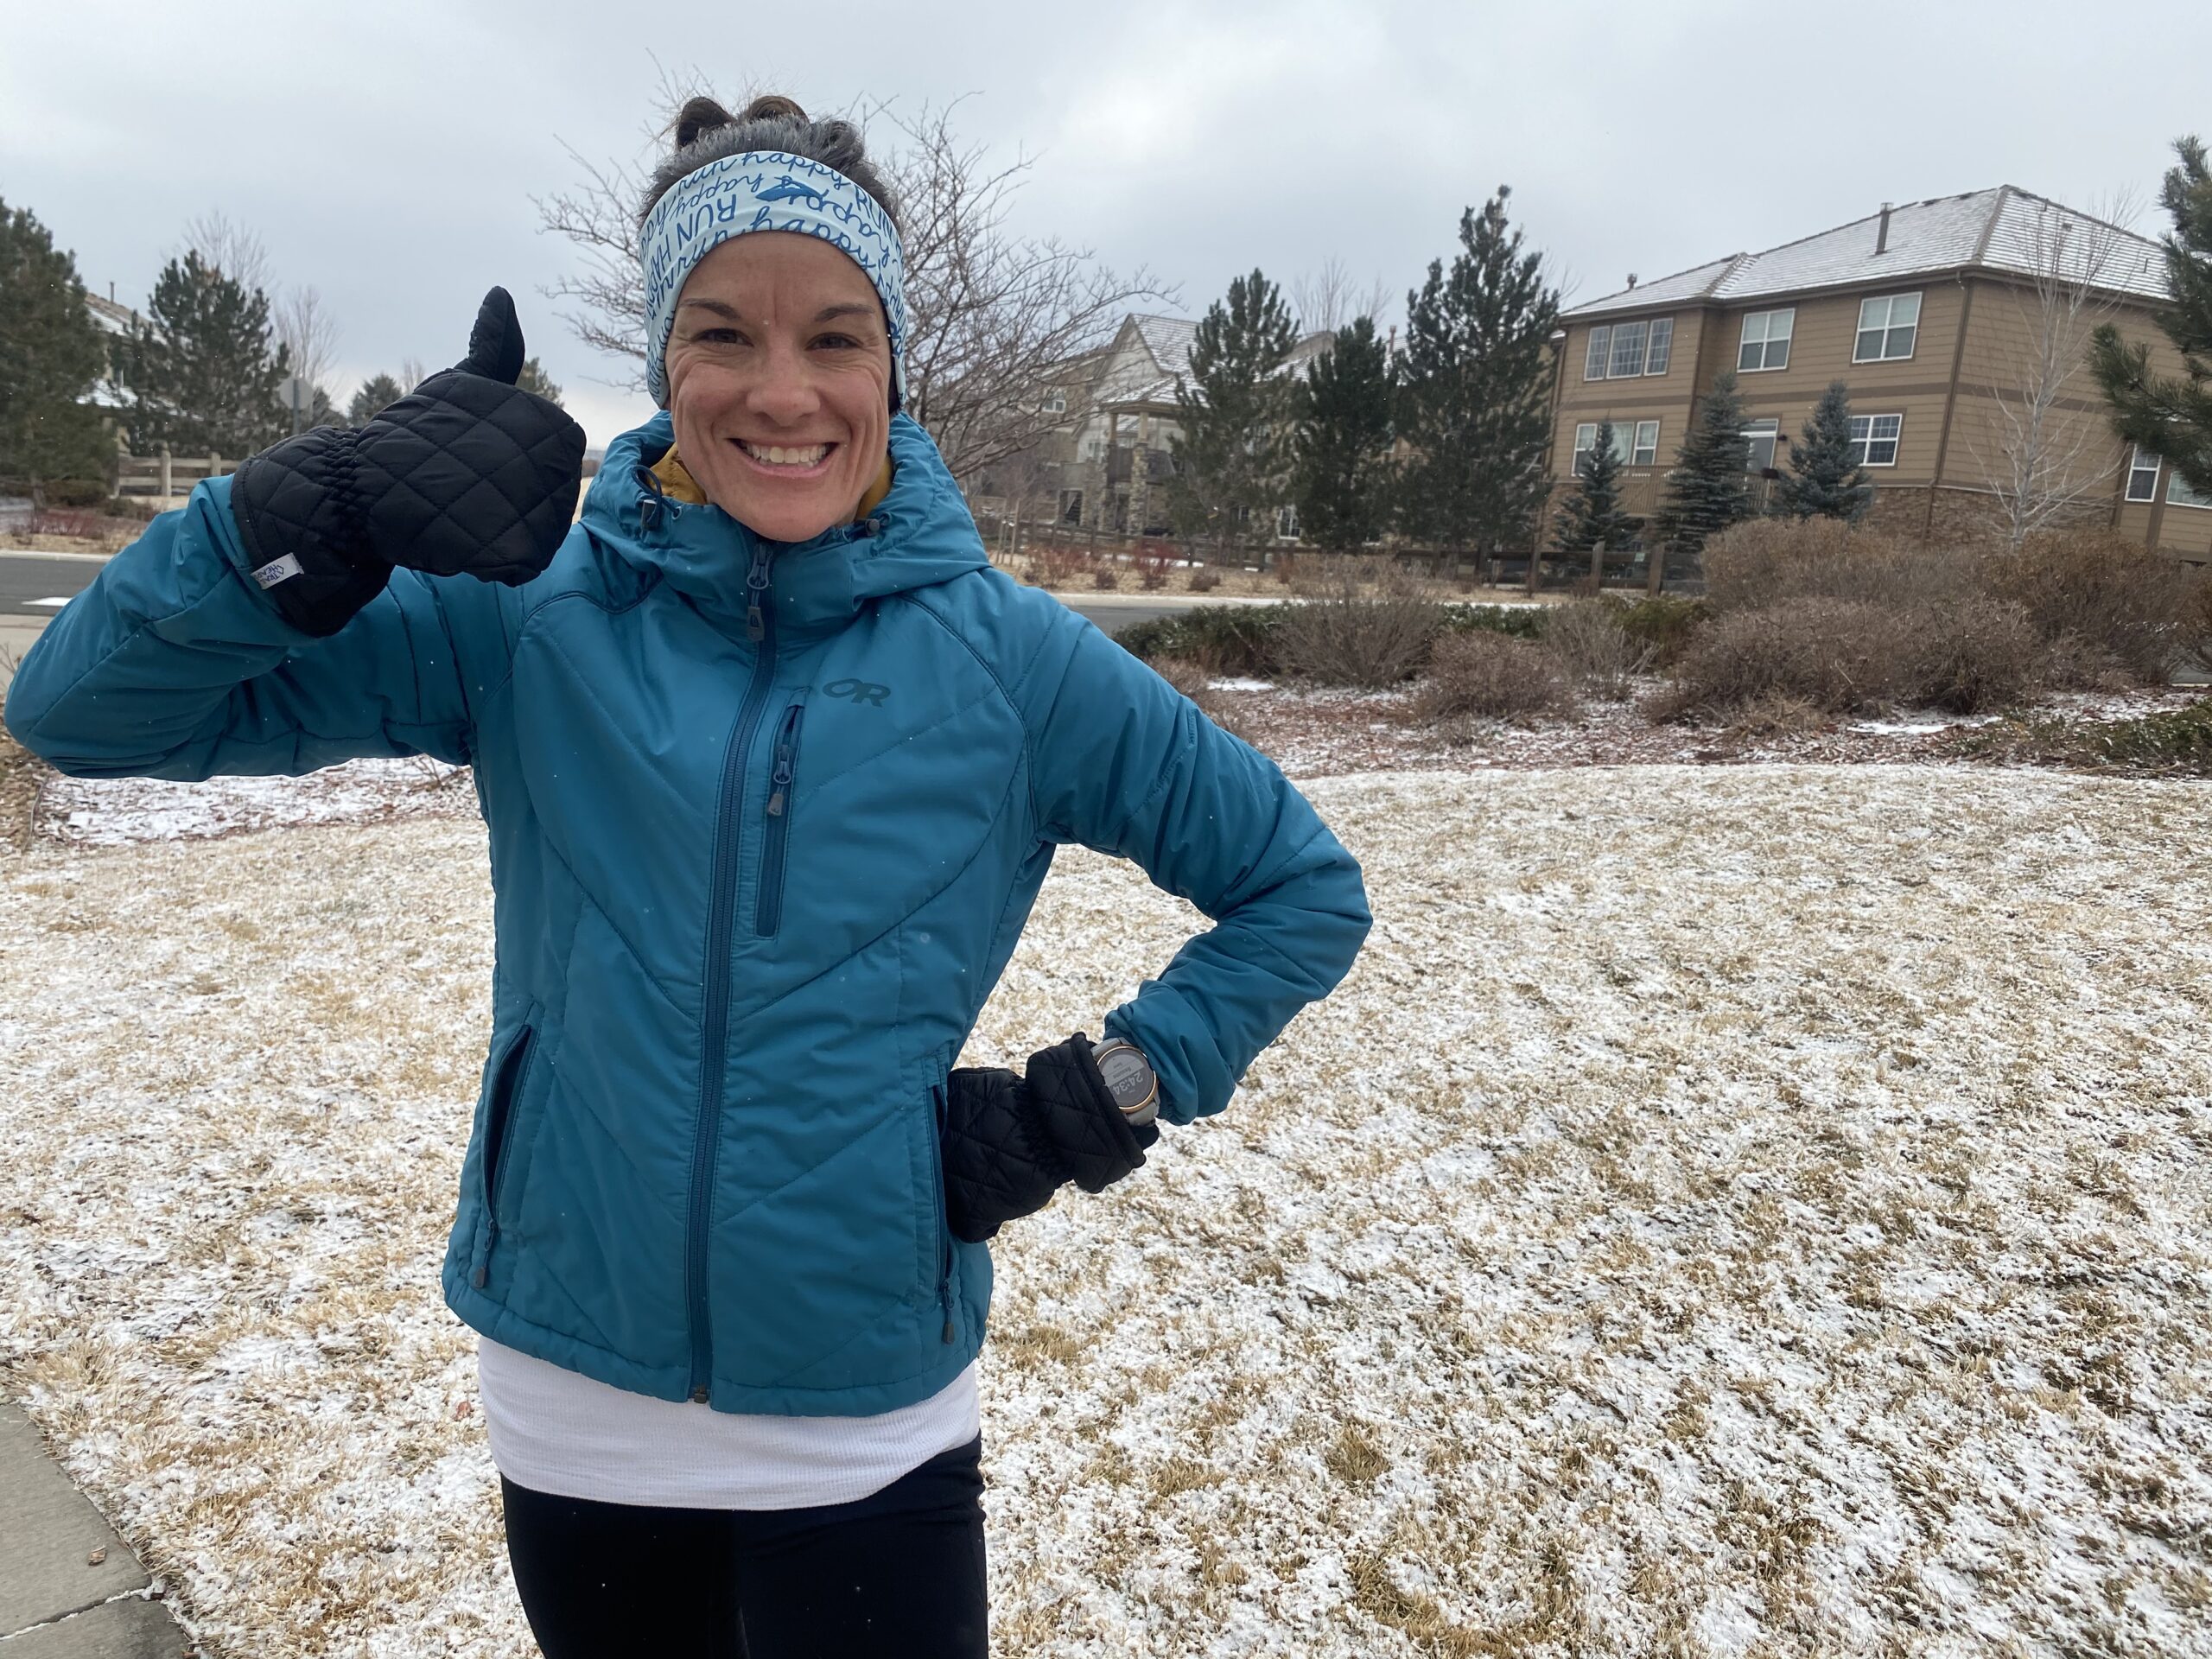 Should You Run in Cold Weather? Weighing the Pros and Cons